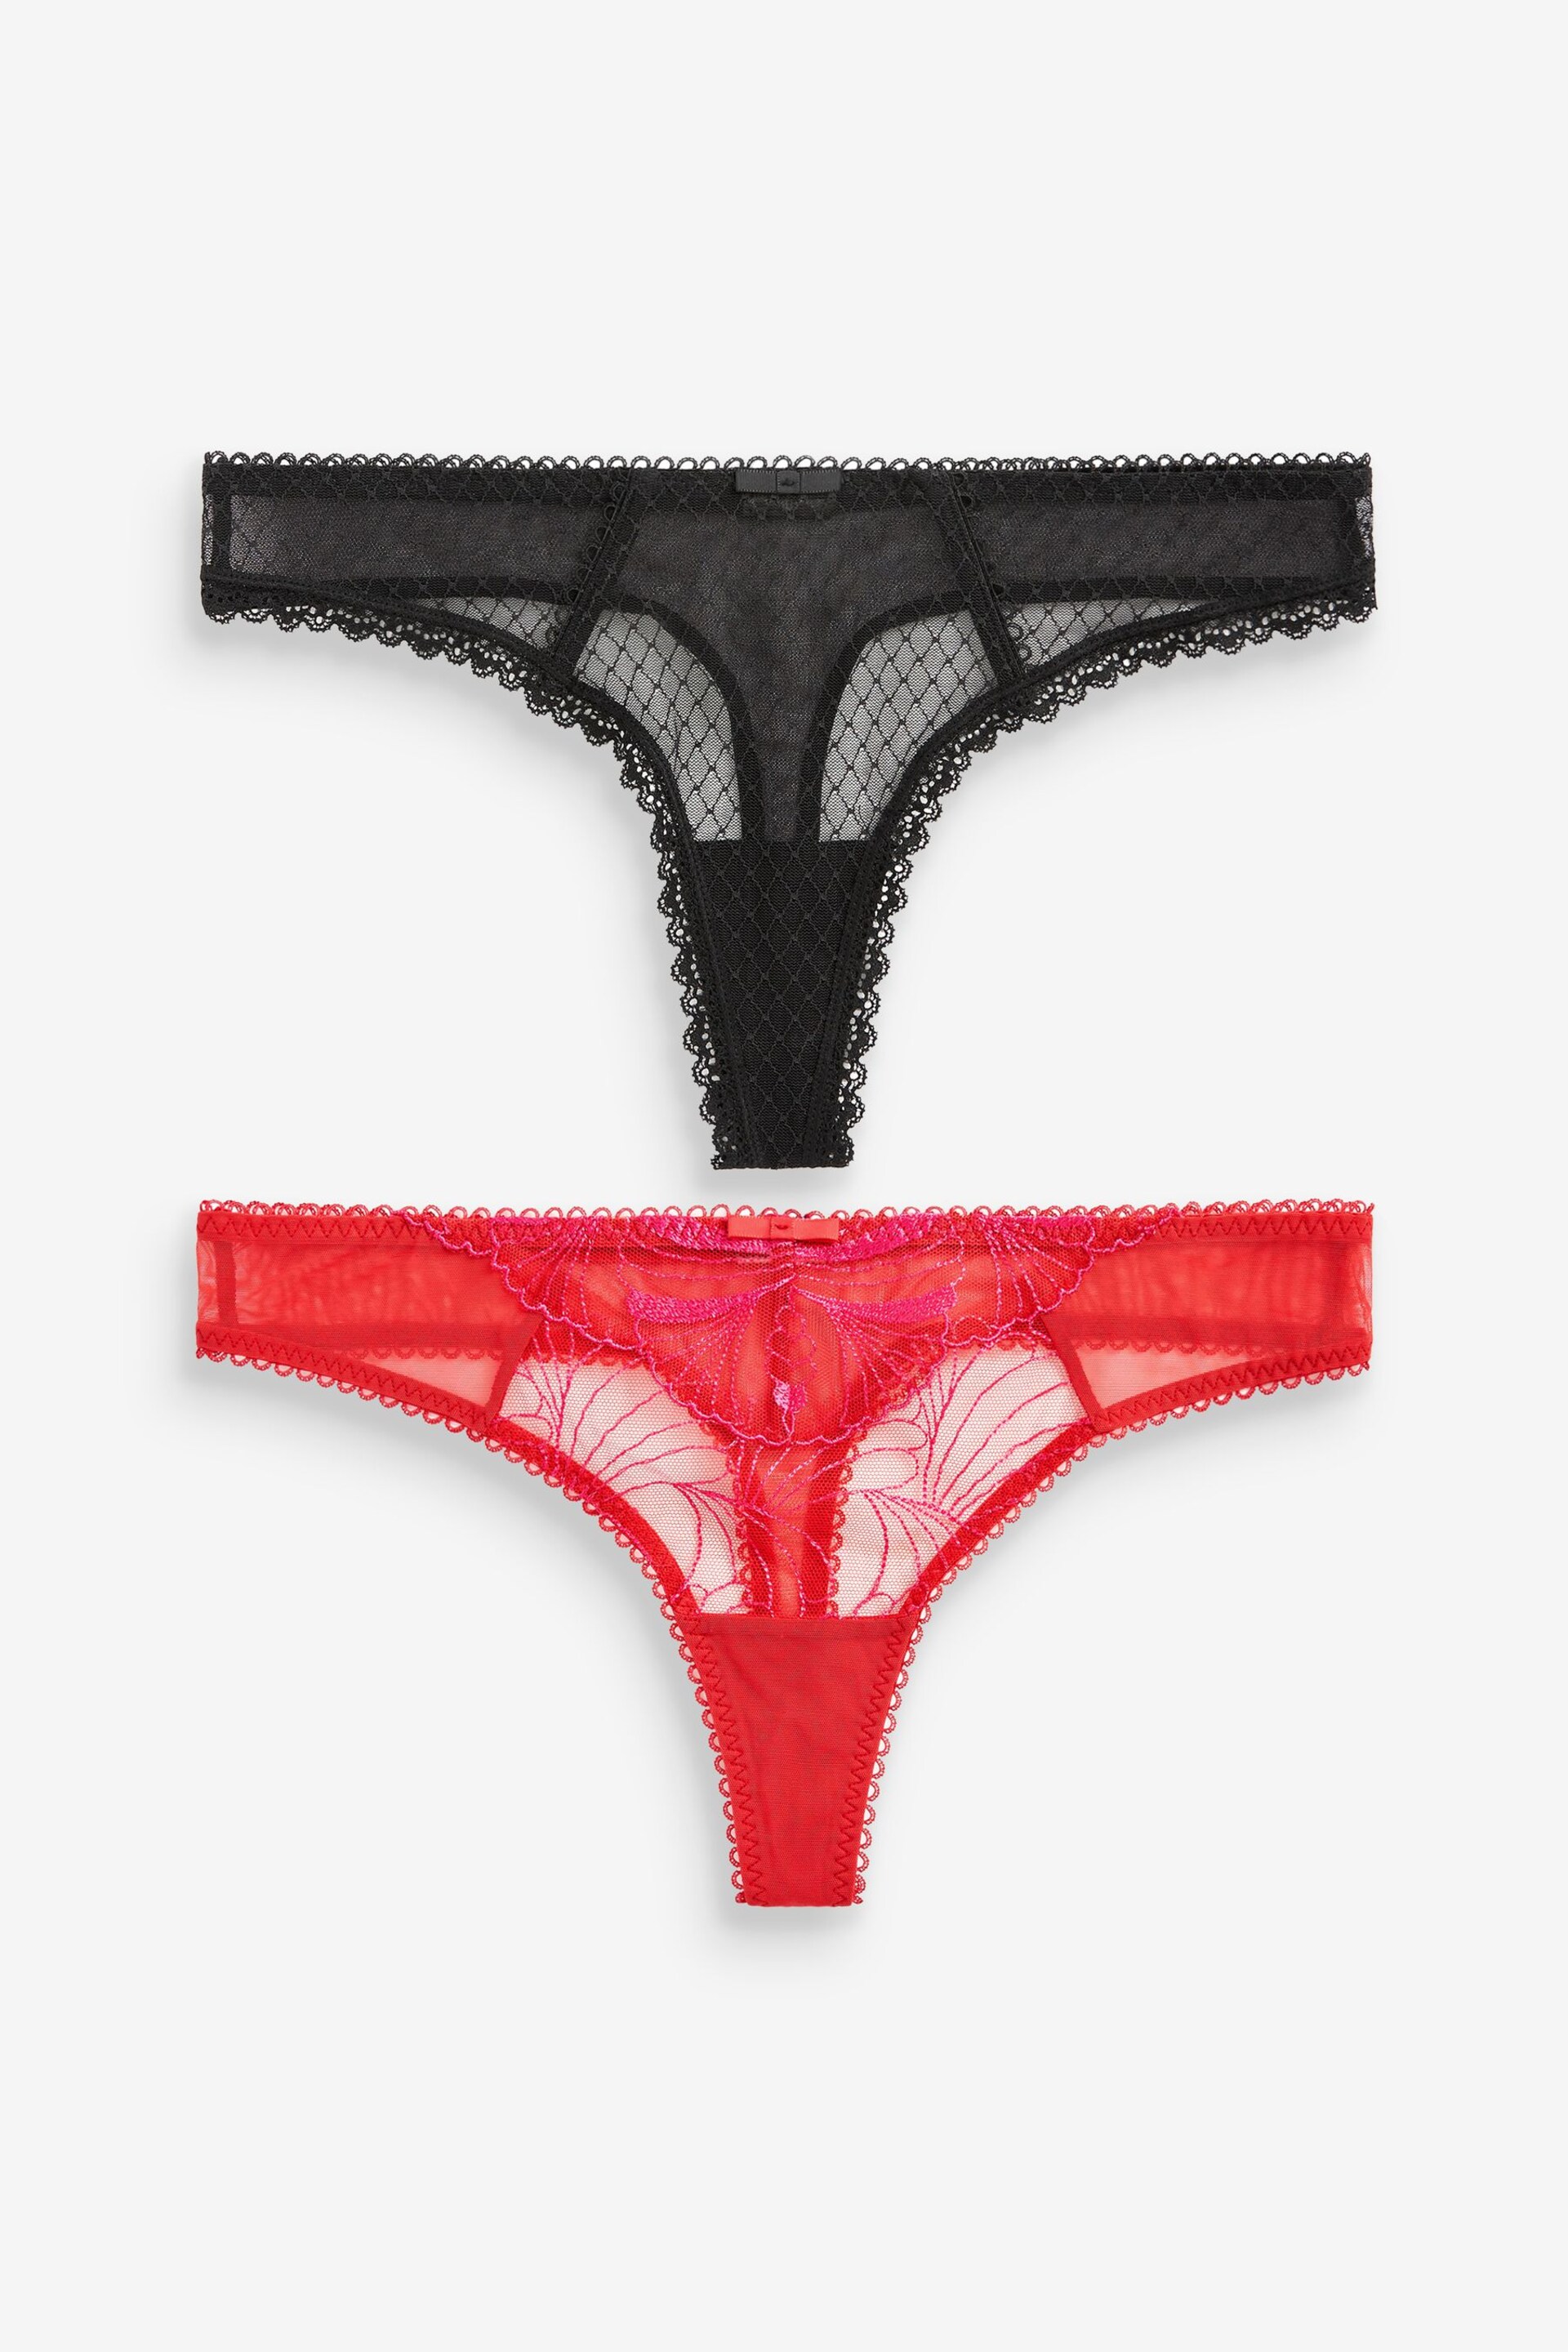 Red/Black Thong Embroidered Knickers 2 Pack - Image 1 of 7